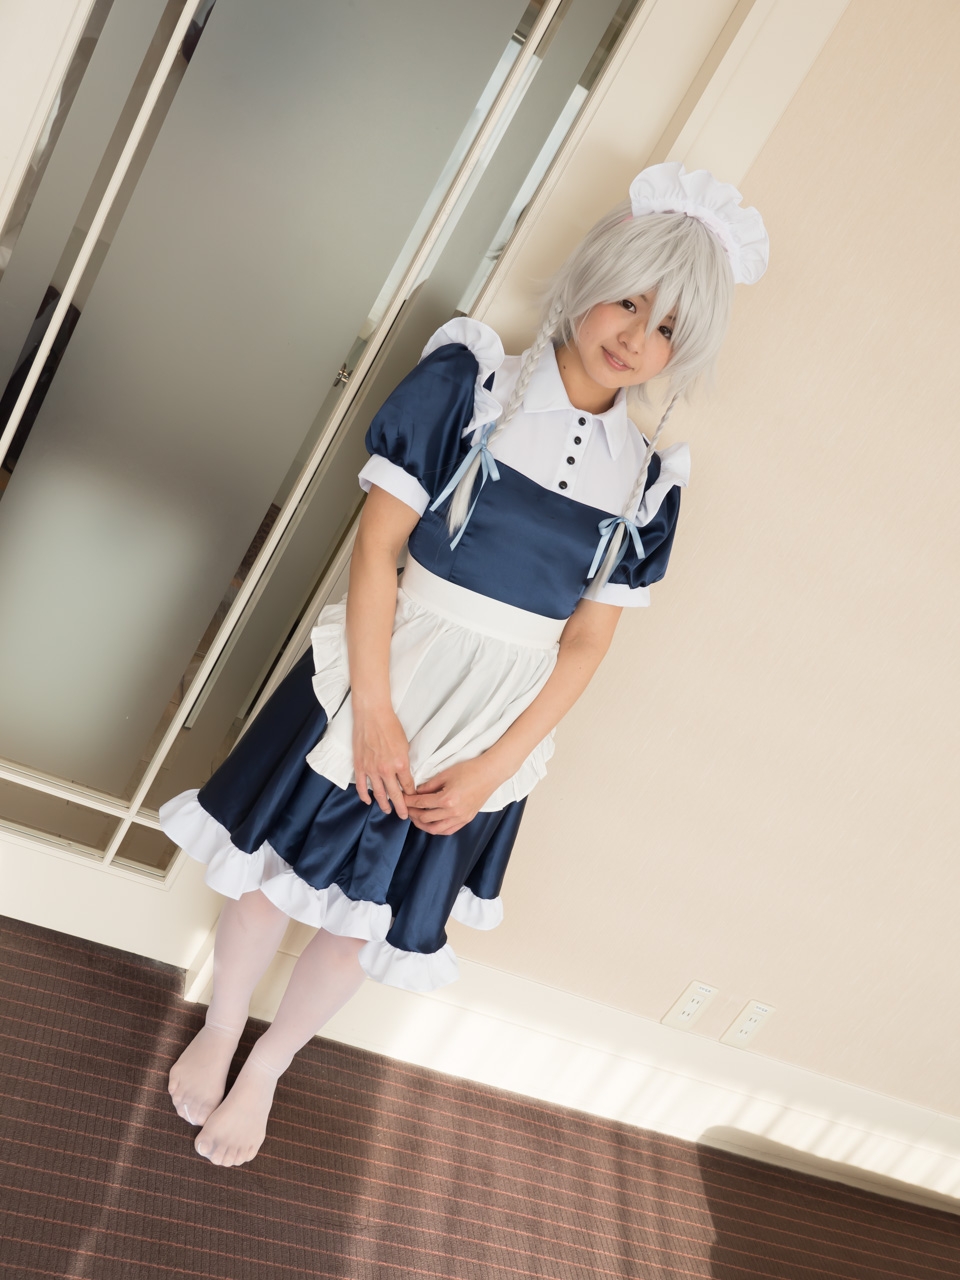 [Sakaki Cosplay Mistress] Sakaki Cosplay Mistress DL 001 (Touhou Project) 170